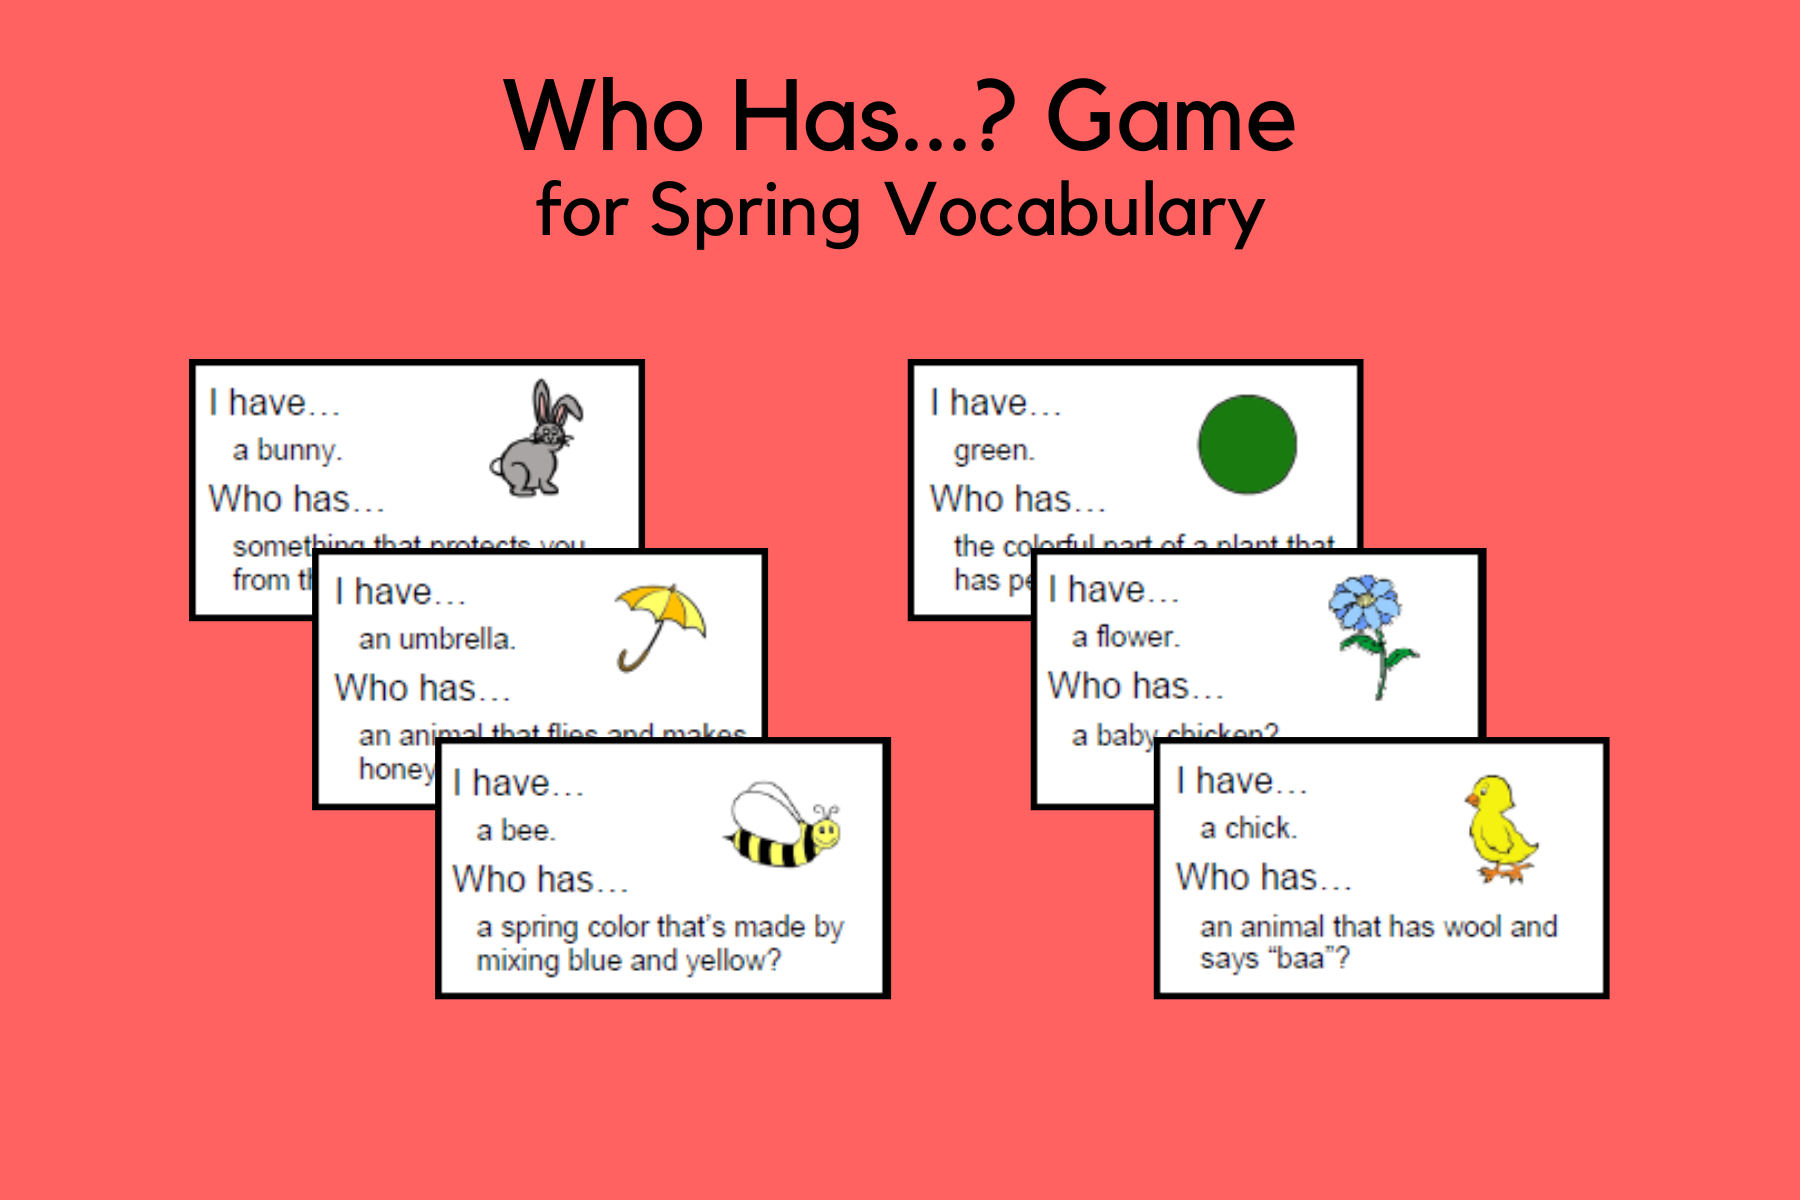 Who Has…? Game Cards for Spring Vocabulary